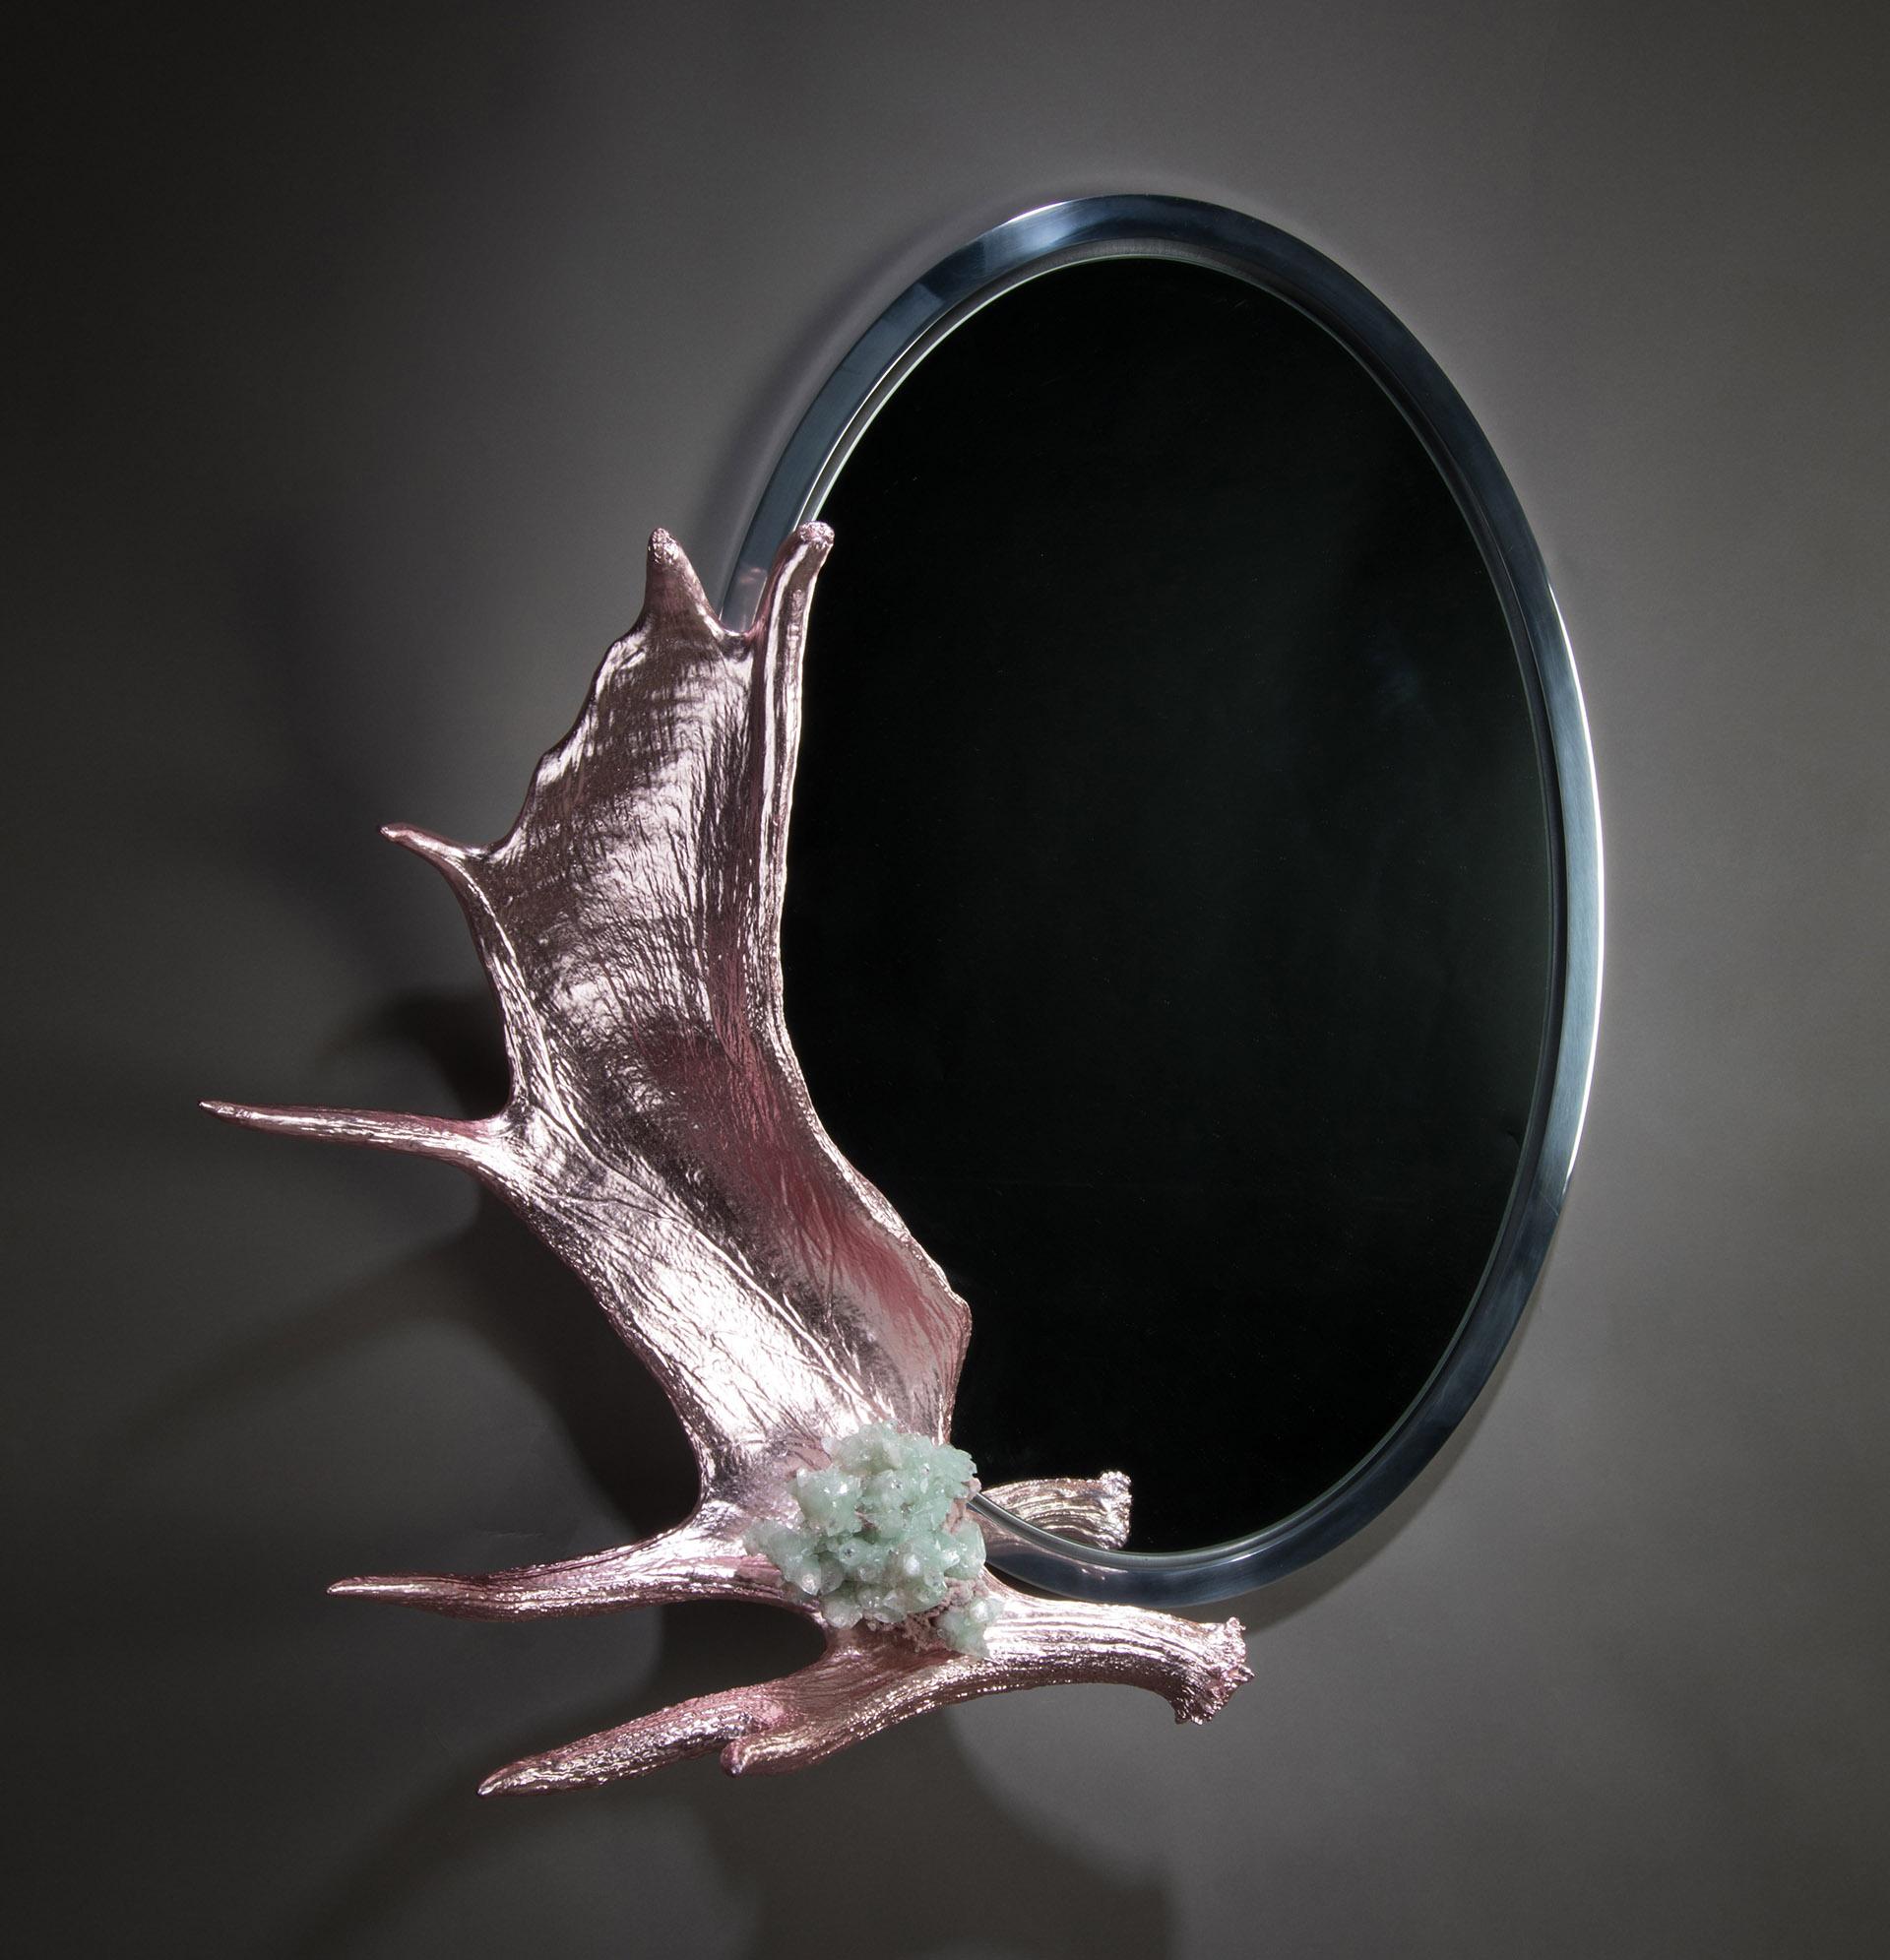 Pink paddle mirror

An apophyllite mineral mounted onto a gilded Alaskan Moose Paddle, the whole mounted to an oval mirror with a polished aluminum frame.